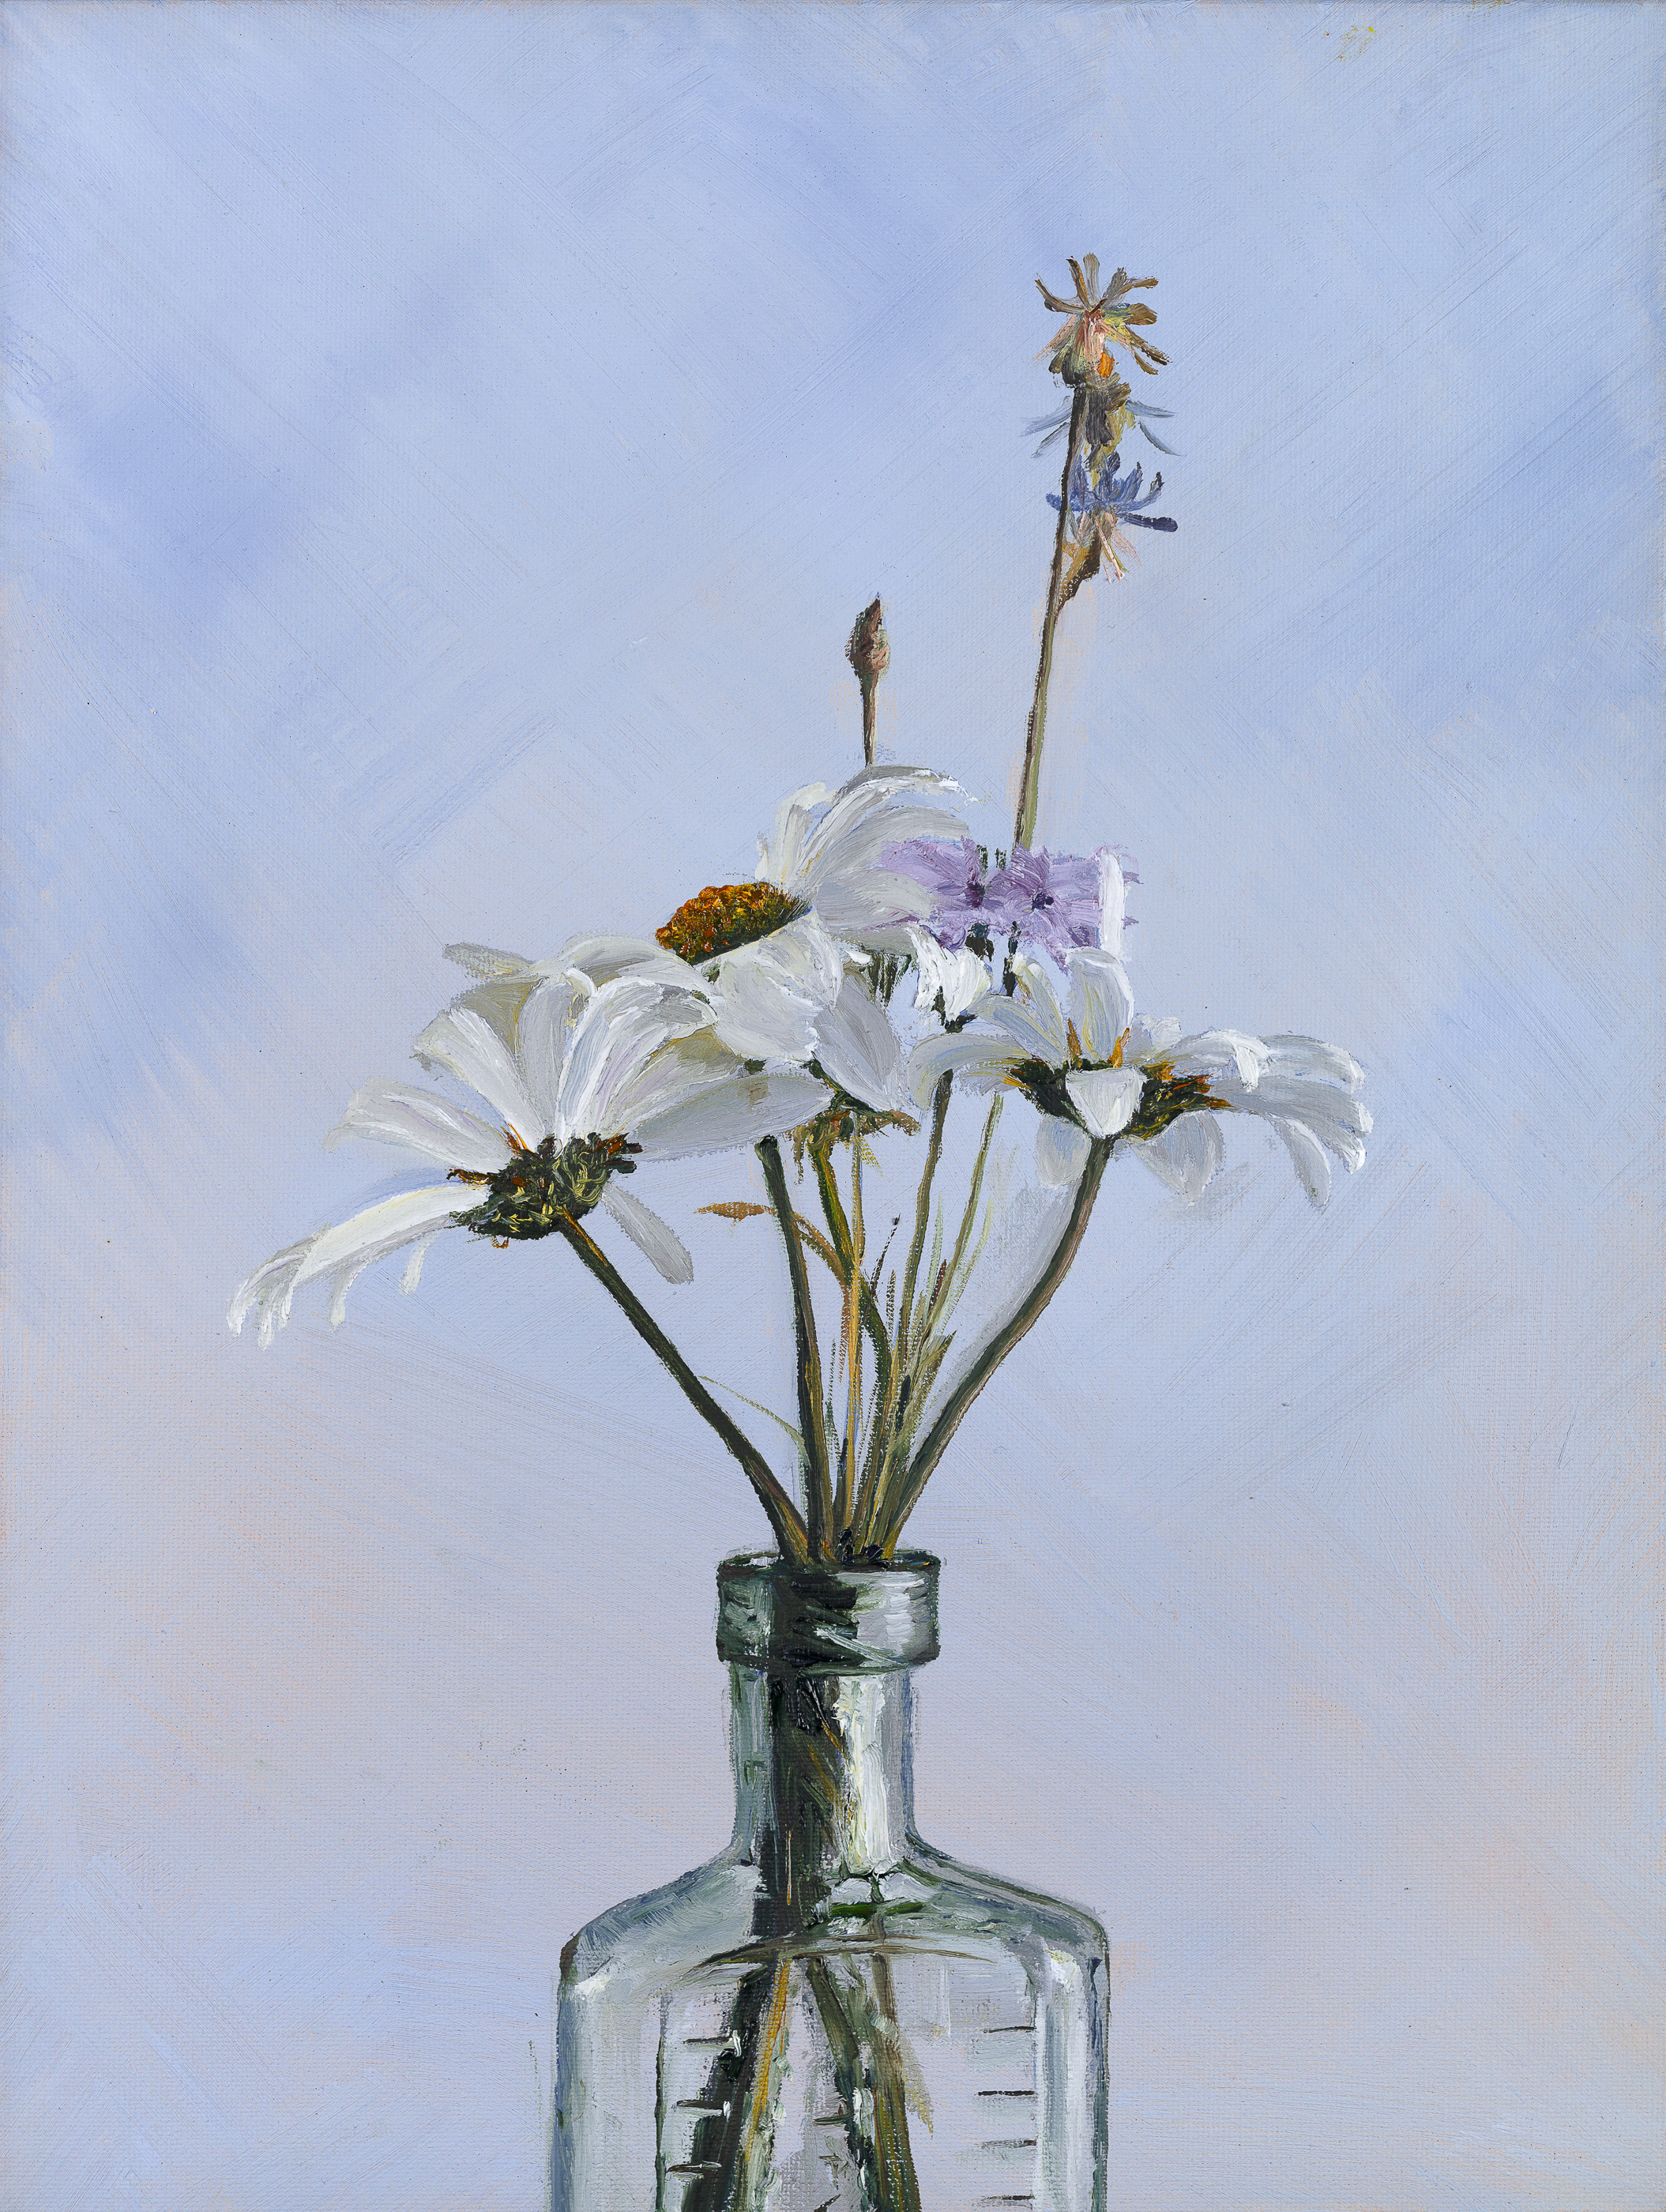 Heidi Mullender_Daisies and linen_2018_oil on canvas - 10 by 14in.jpg